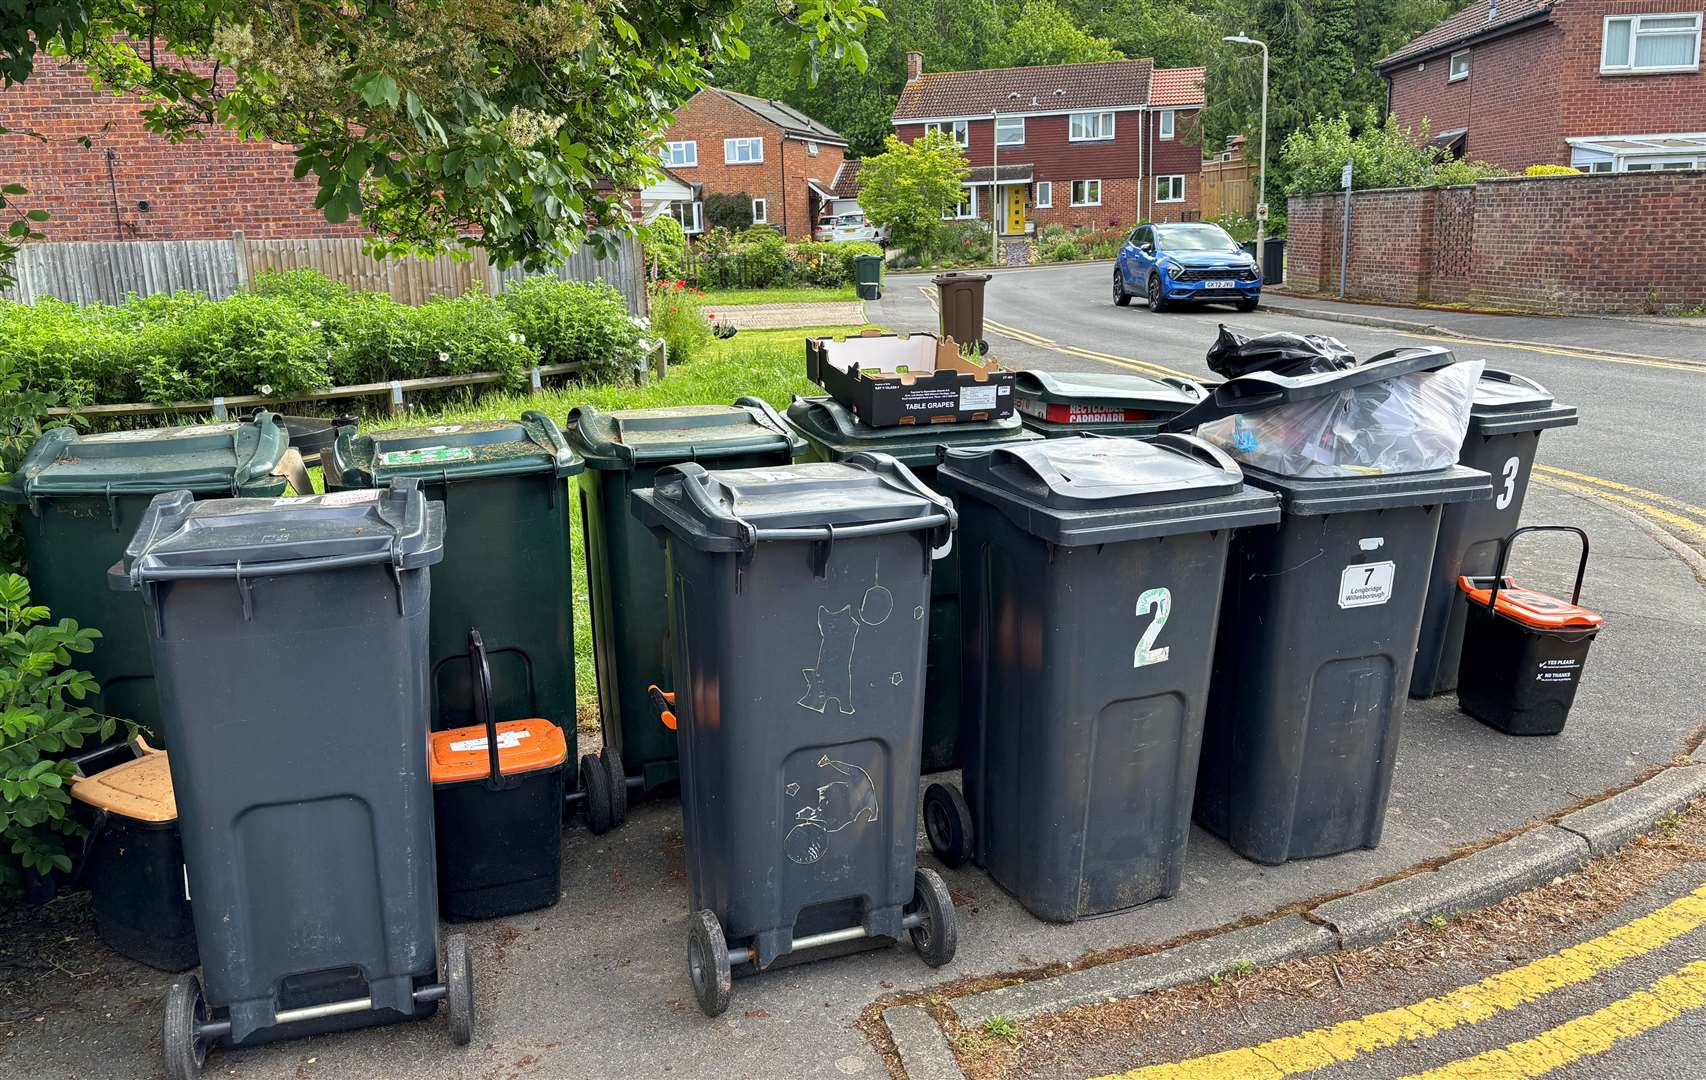 Longbridge is one of the many roads across Ashford and Kent affected by the Suez bin crisis. Picture: Joe Harbert